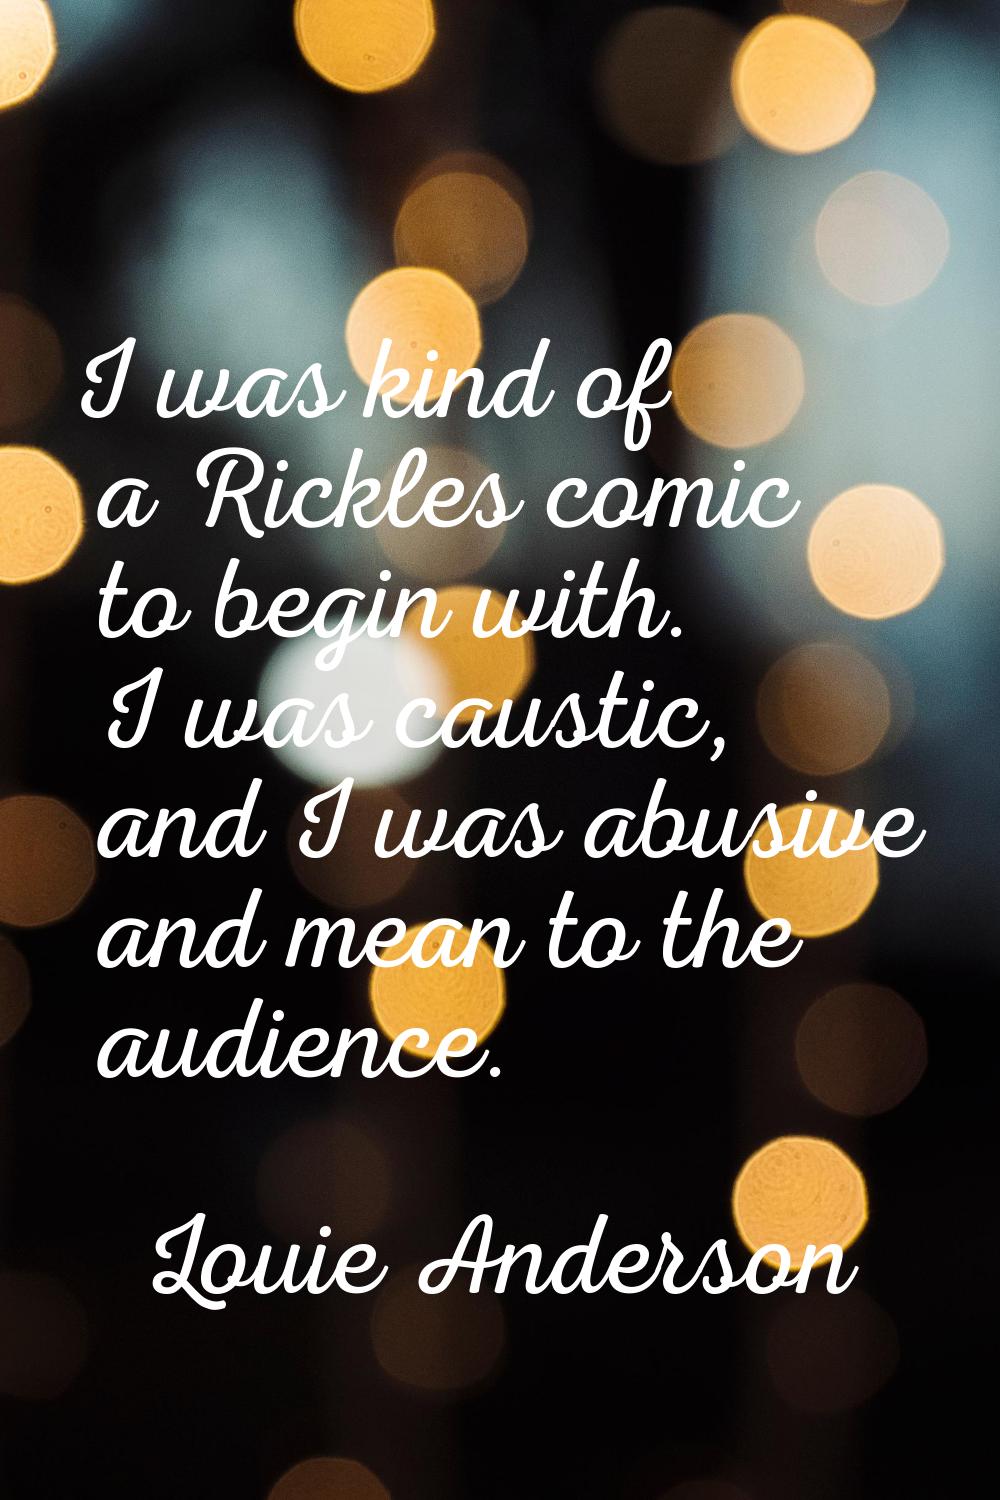 I was kind of a Rickles comic to begin with. I was caustic, and I was abusive and mean to the audie